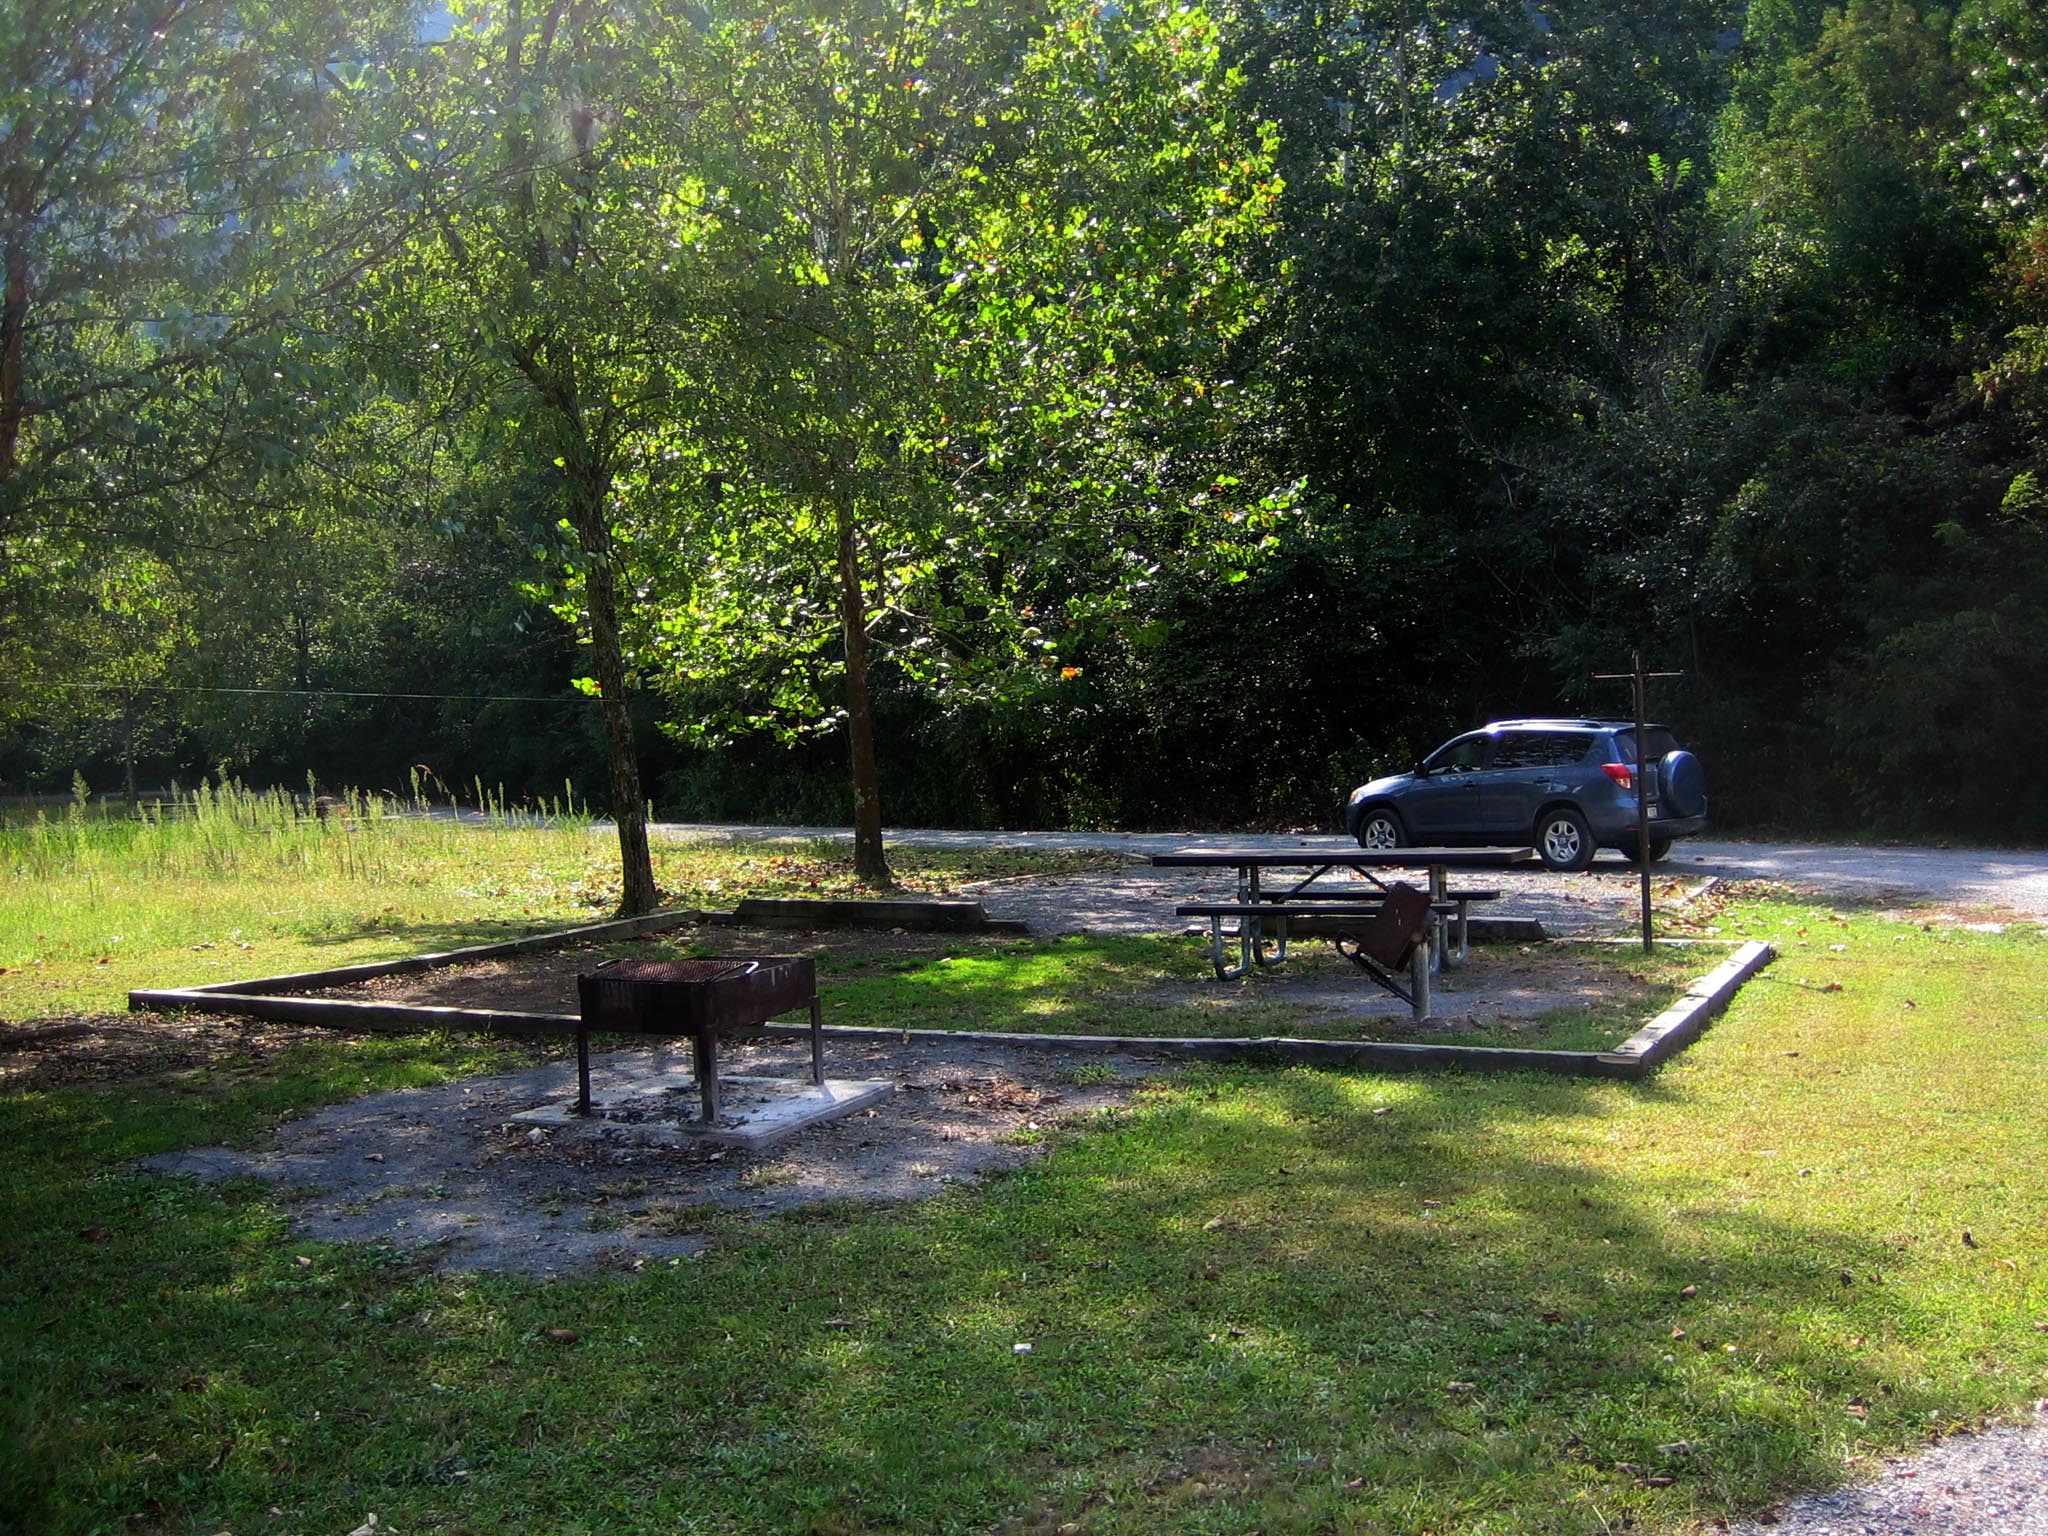 A grassy field campsite with a picnic table and grill partially shaded by a few trees.